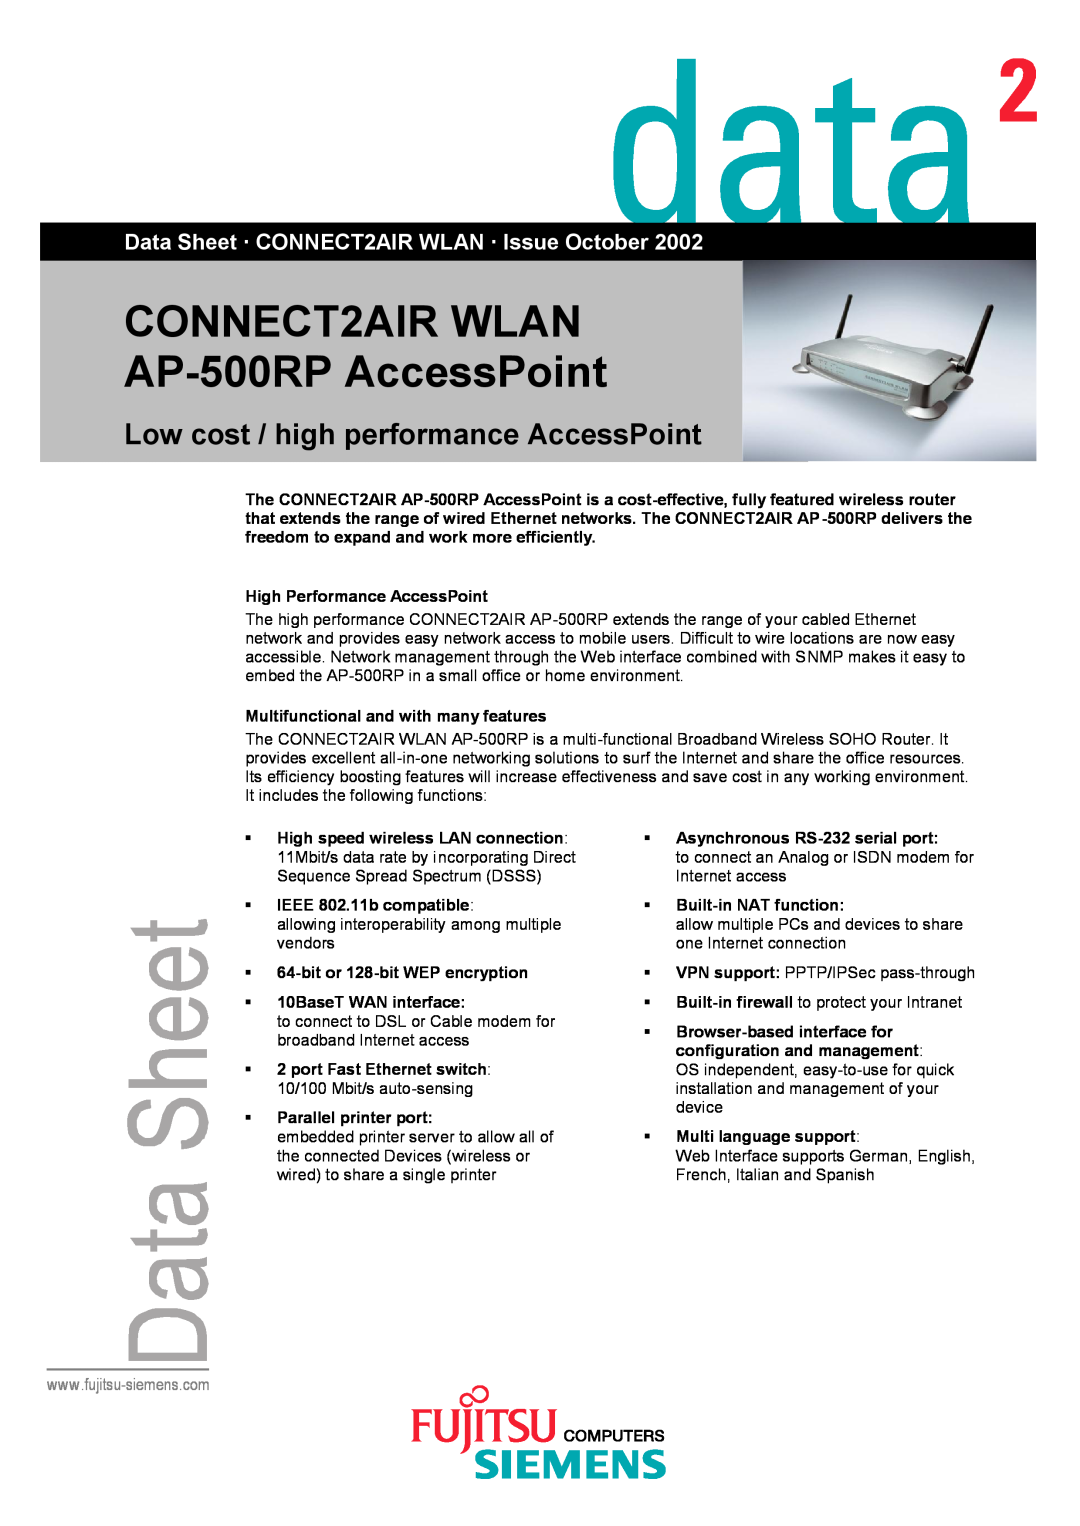 Fujitsu manual CONNECT2AIR WLAN AP-500RP AccessPoint, Low cost / high performance AccessPoint 